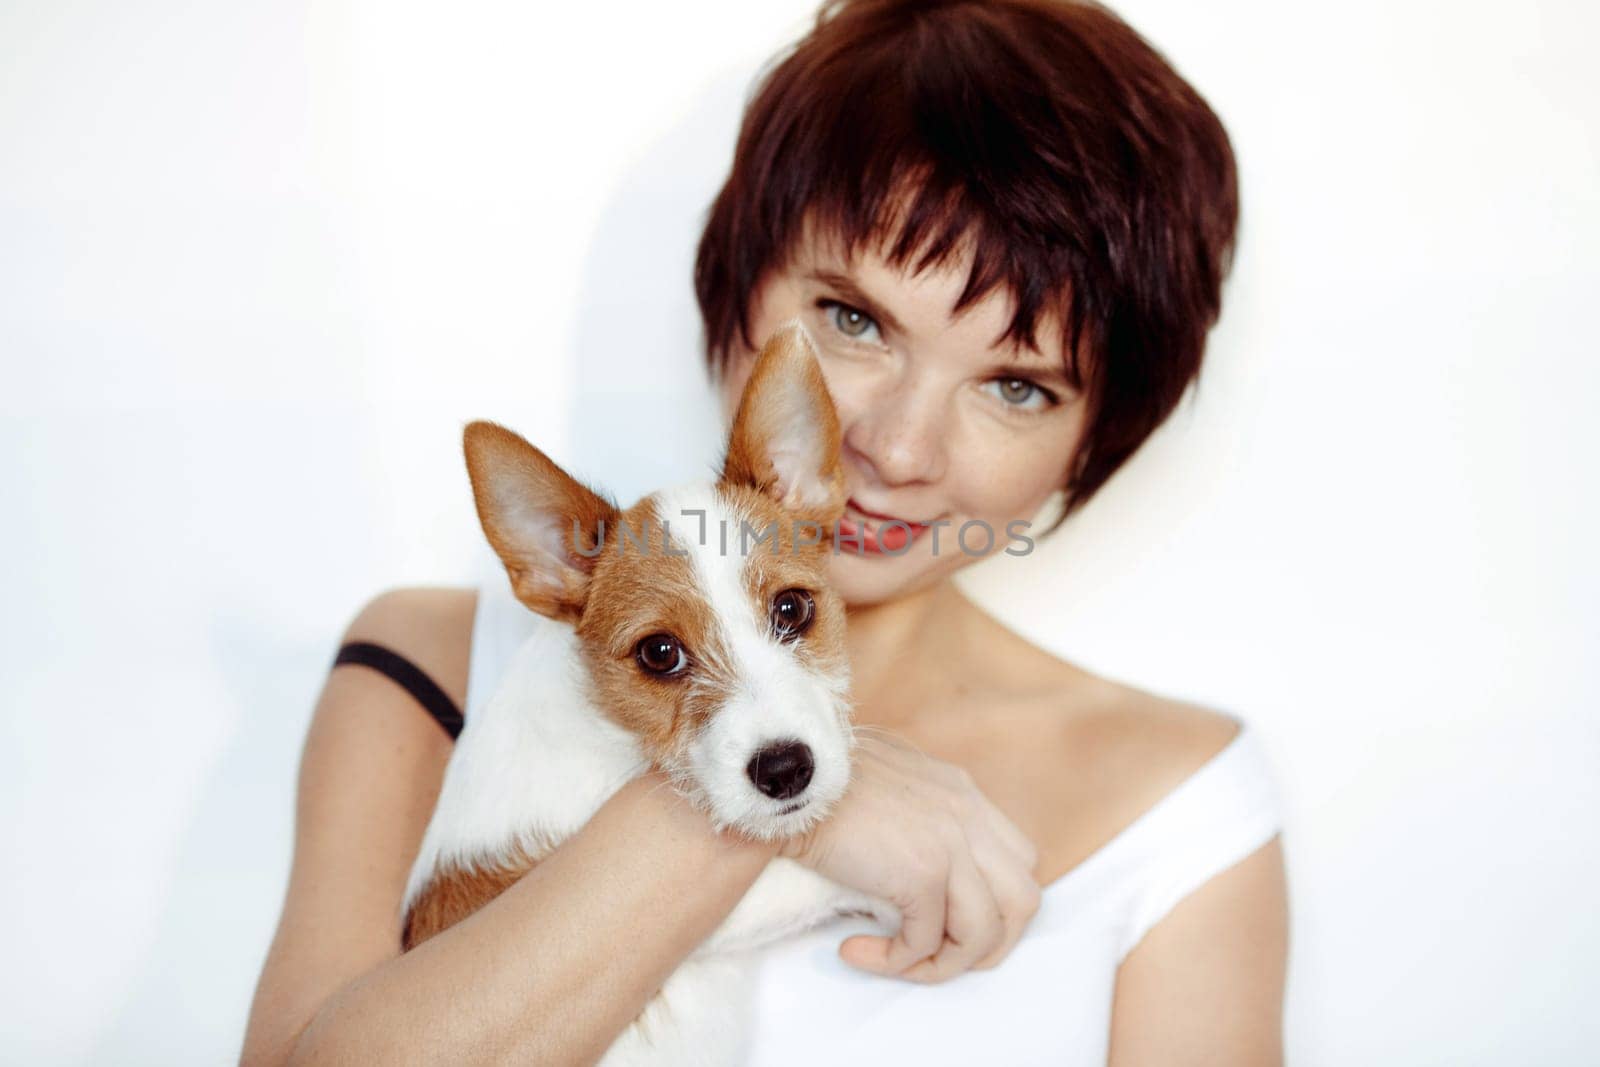 Portrait of good looking cheerful woman enjoys company of small pedigree dog wears white tank top spends free time with favorite pet isolated over white background. Animal owner